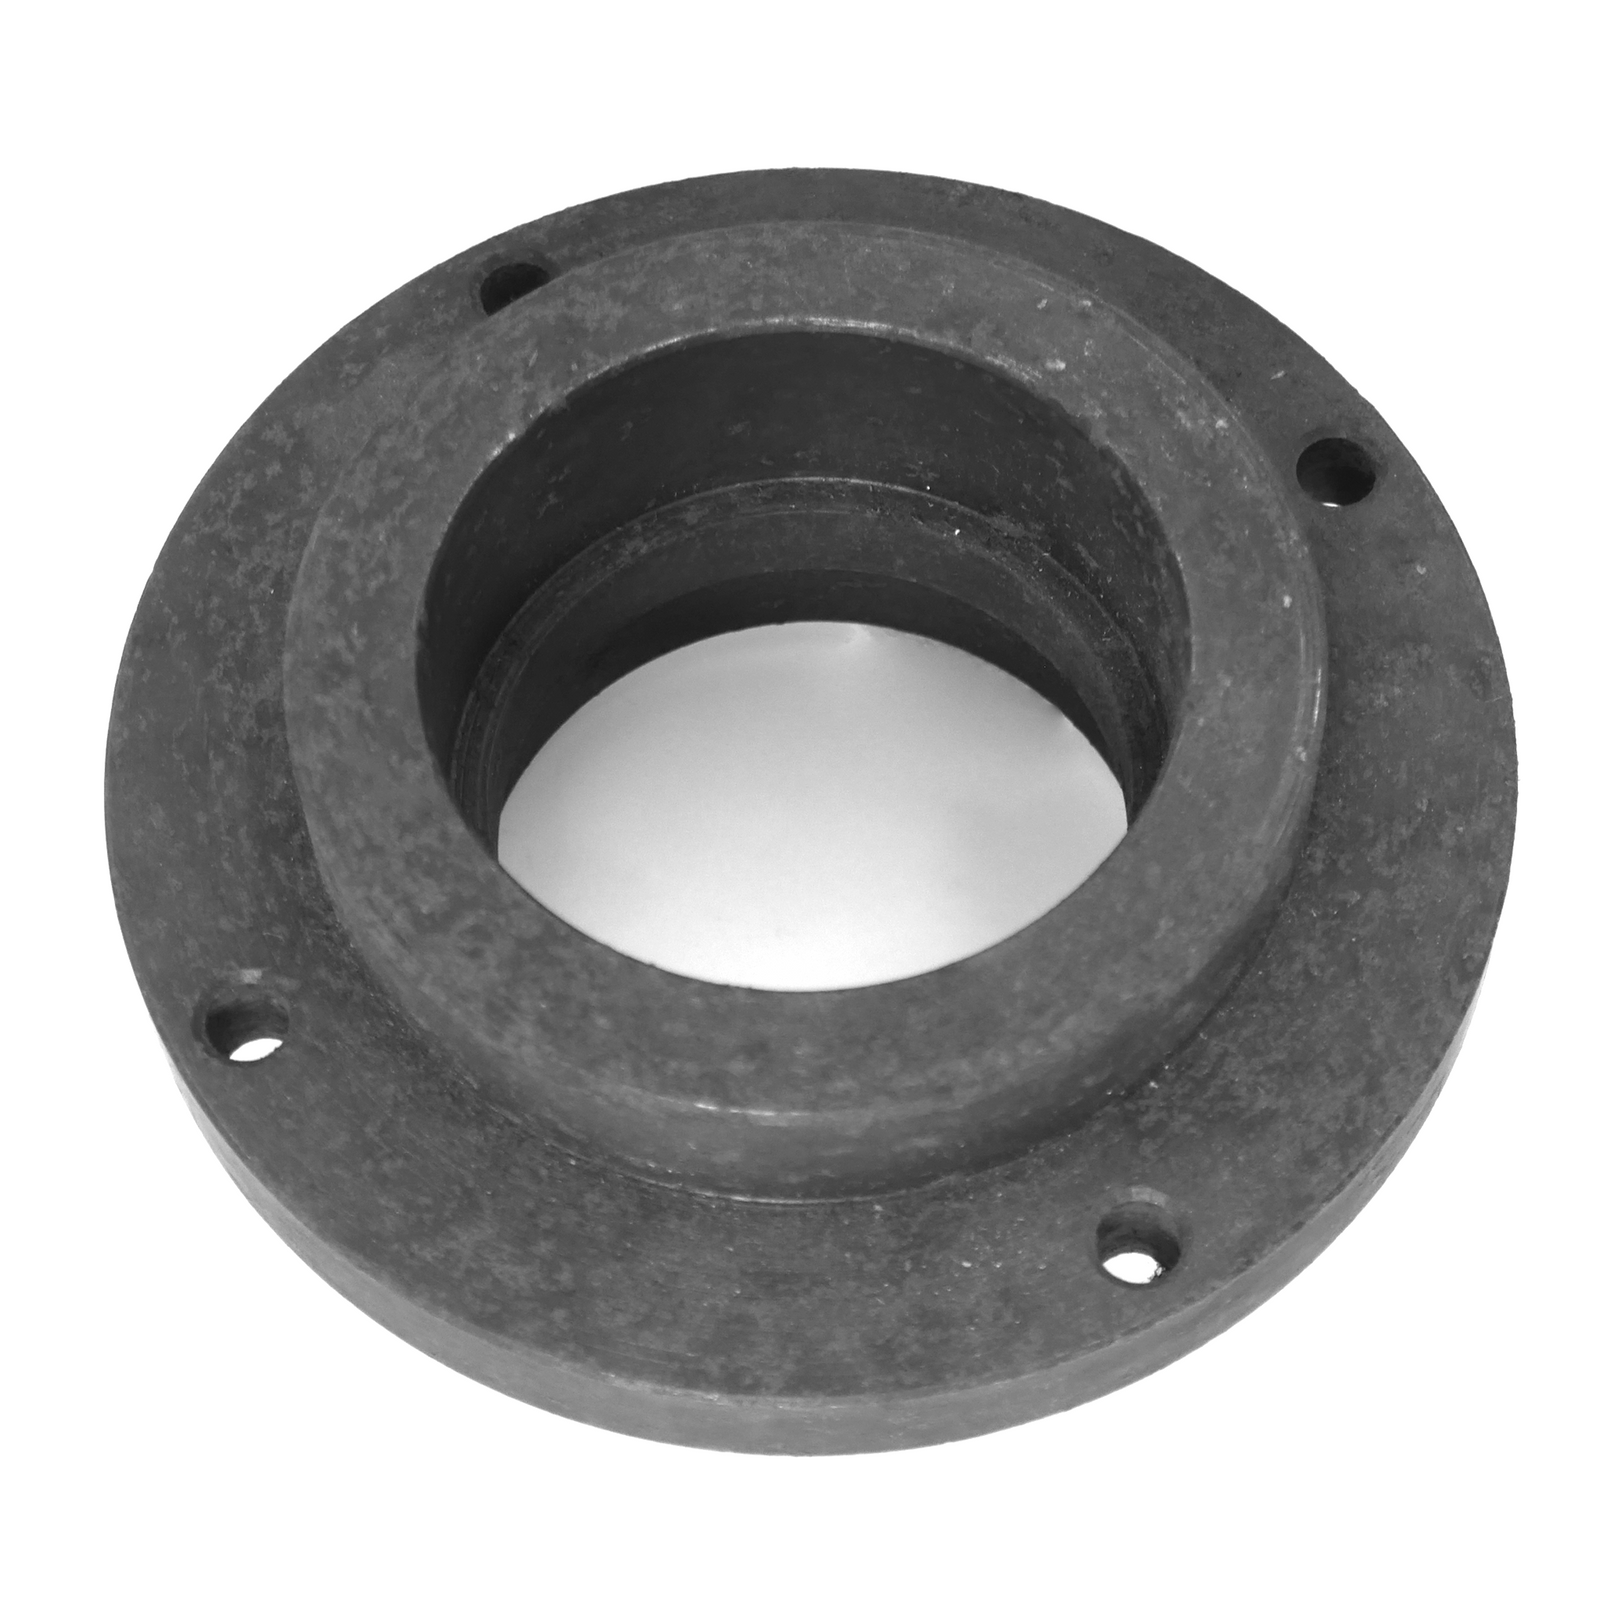 Spindle bearing seat part for a semi-automatic powder auger filler machine